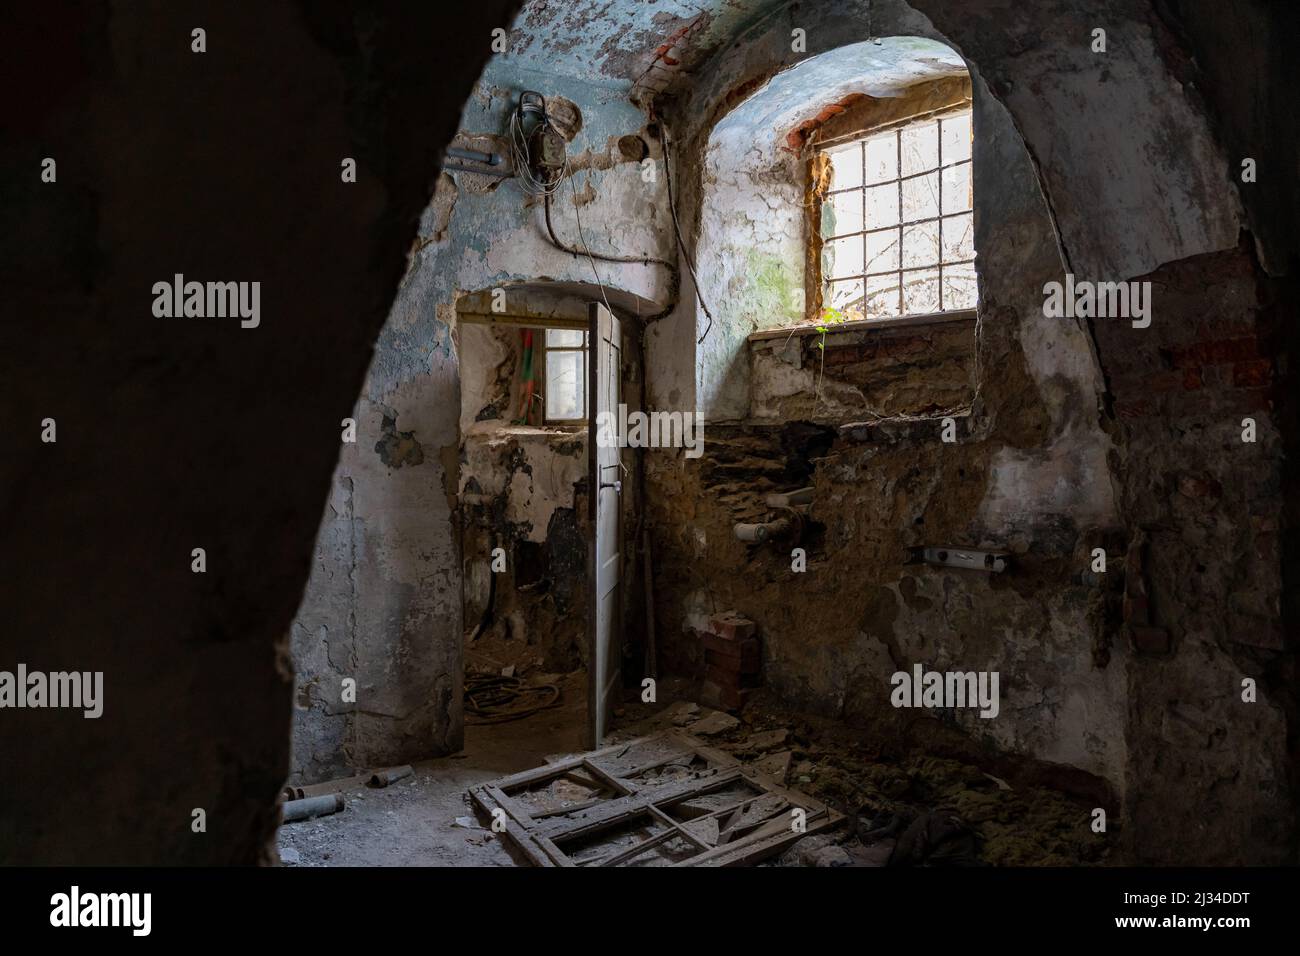 Basement of an abandoned building with damaged walls and interior in bad condition. Old ruin with paint peeling off. Eroded dangerous dirty house. Stock Photo